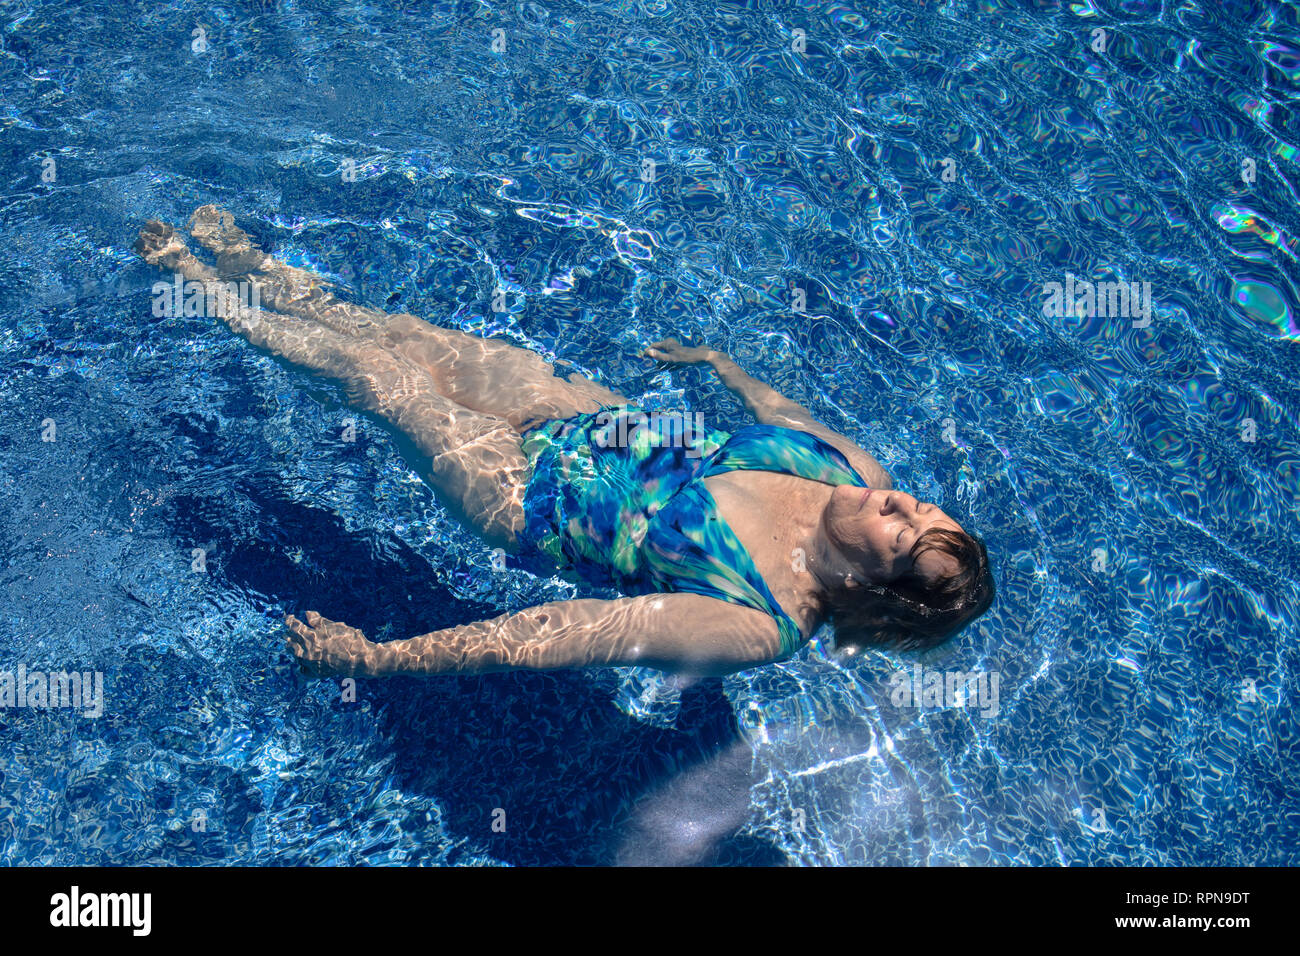 Senior woman floating in the swimming pool. Stock Photo